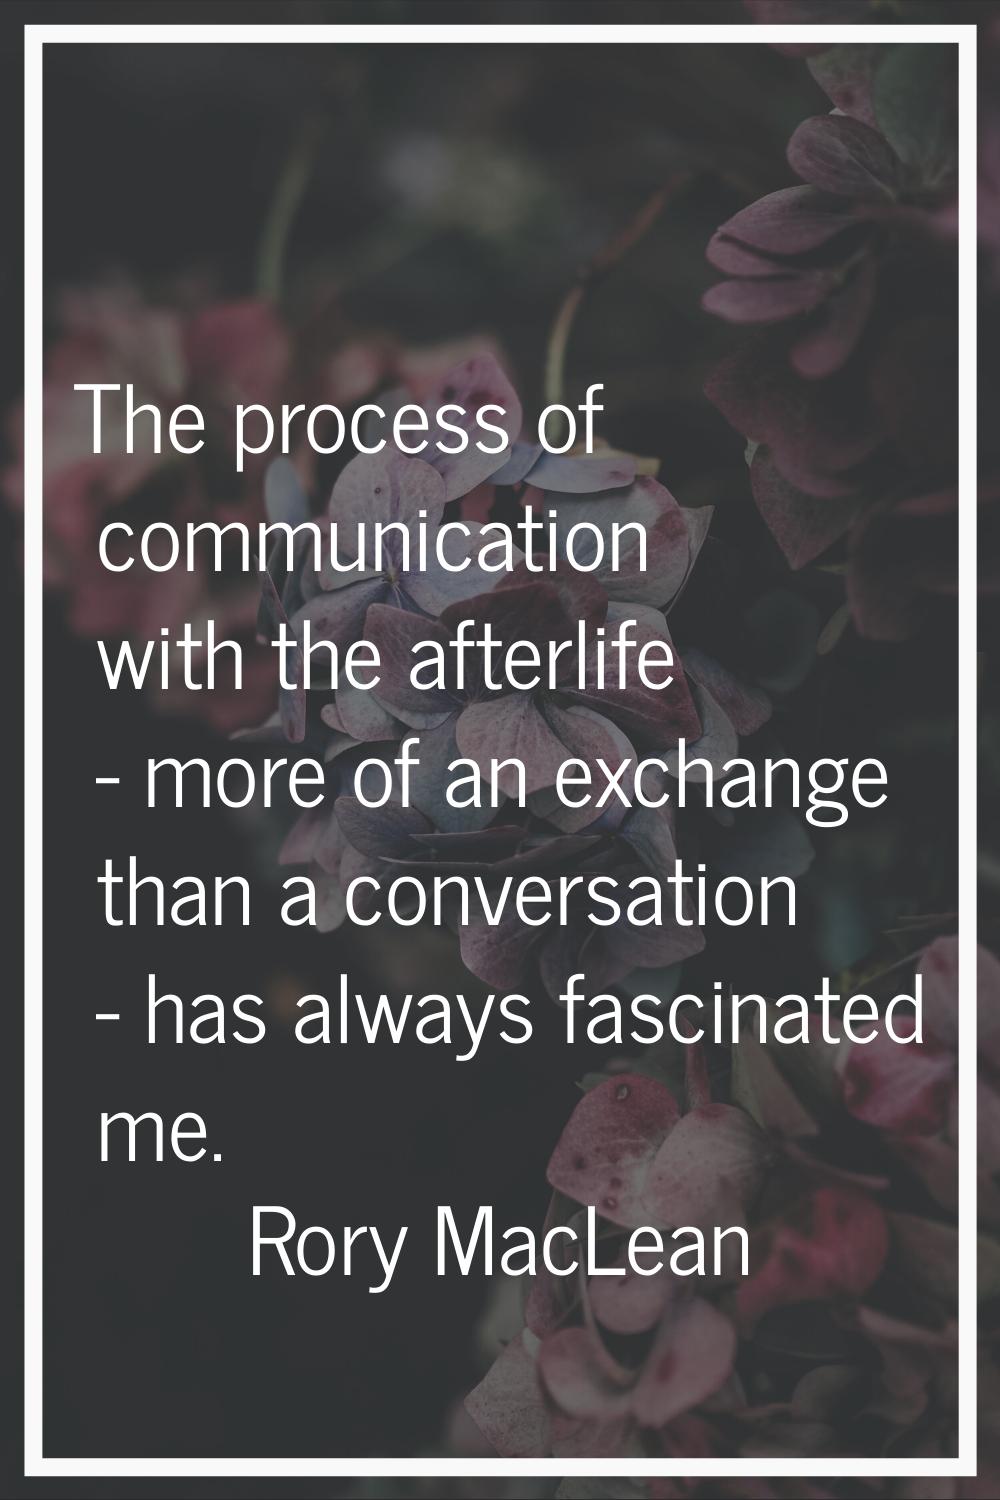 The process of communication with the afterlife - more of an exchange than a conversation - has alw